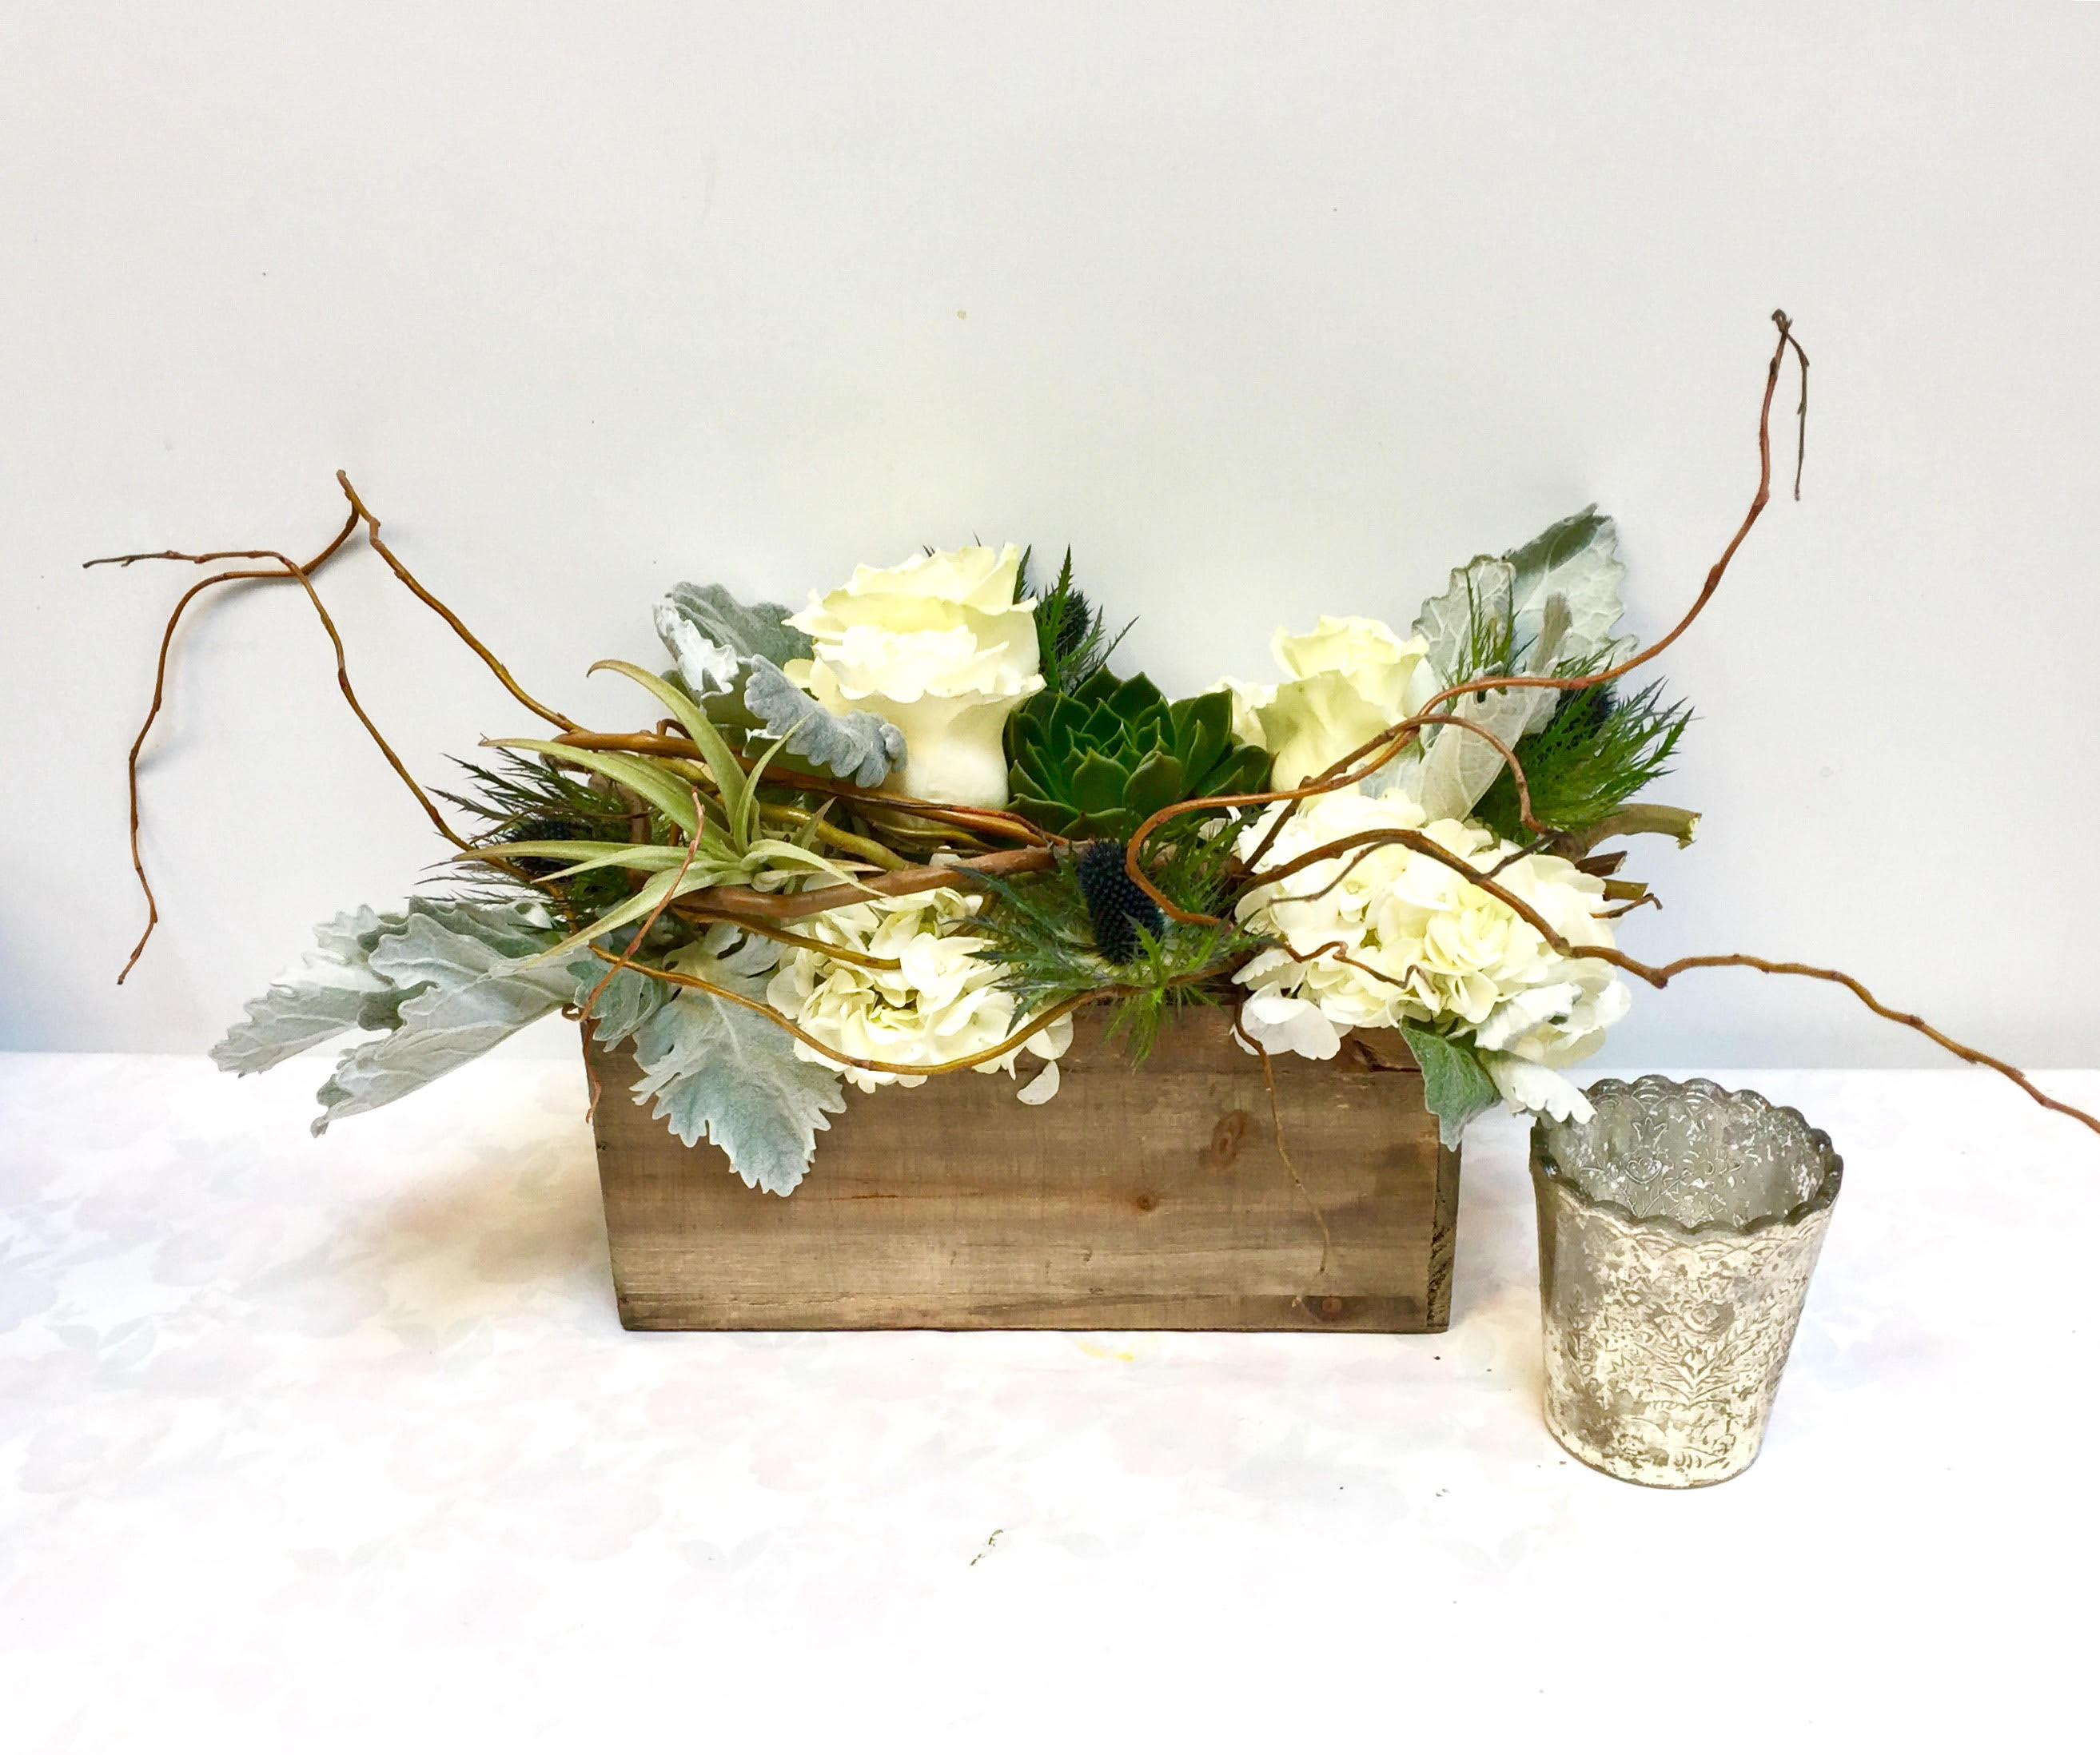 Botanical Garden by Hudson Flower Shop - A stunning garden mix of roses, dusty miller, hydrangea, succulent, air plant and thistle in a substantial size rustic wooden rectangle.